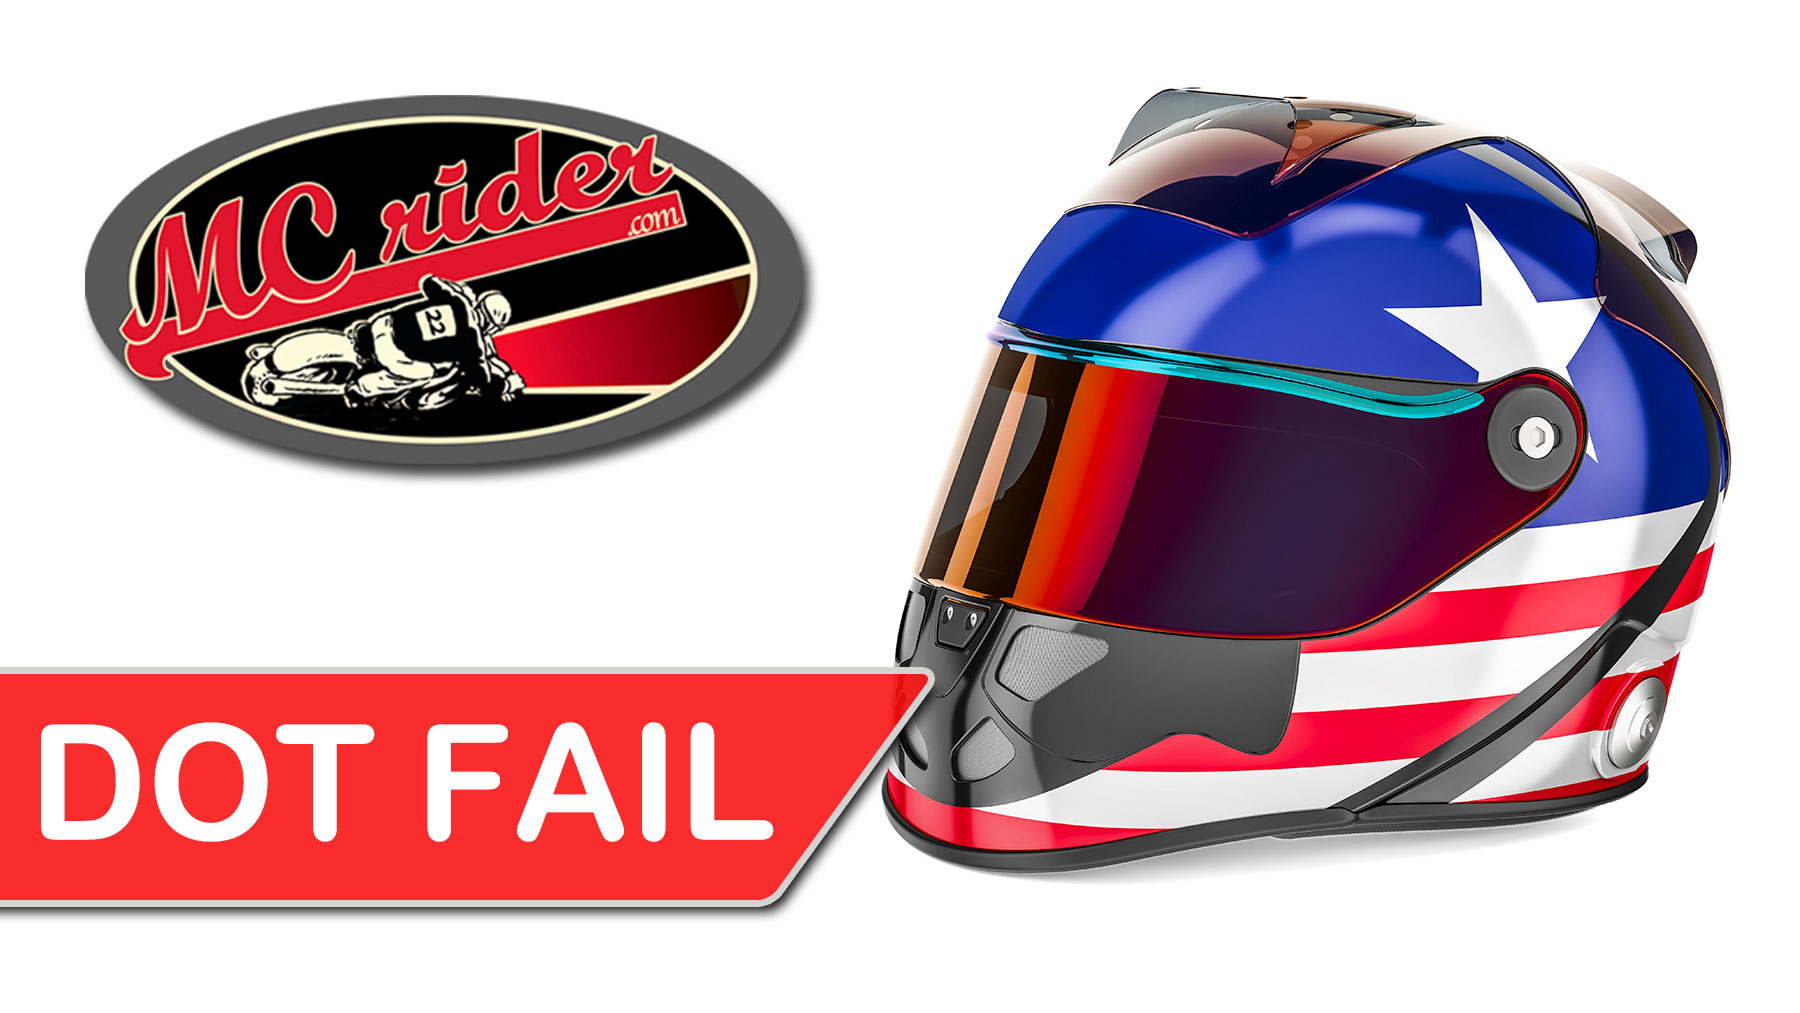 Does a DOT certification guarantee a safe motorcycle helmet? » MCrider